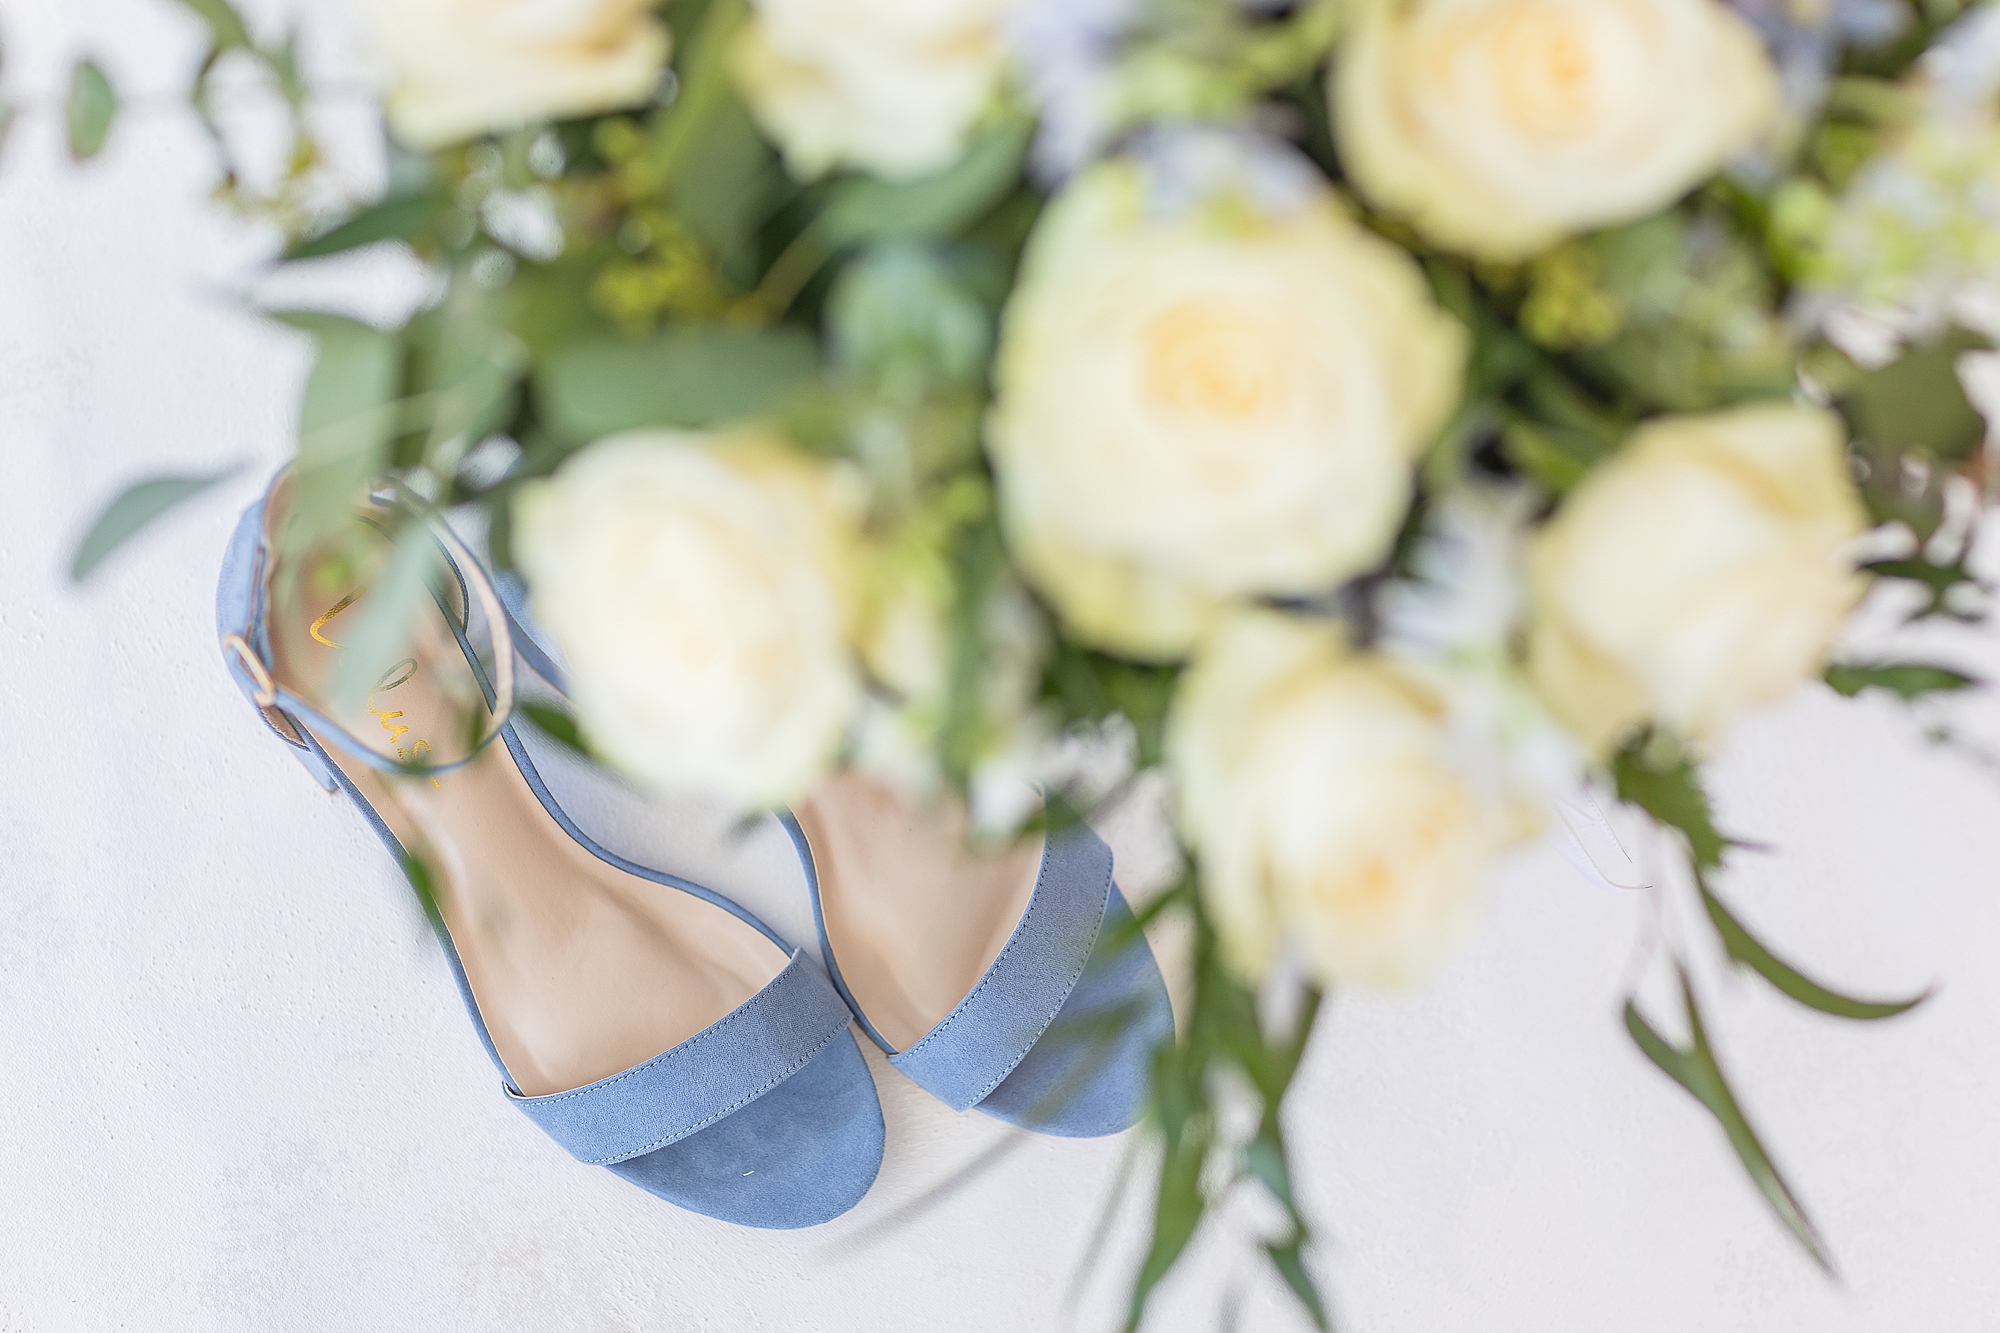 blue suede heels rest under yellow and blue bouquet